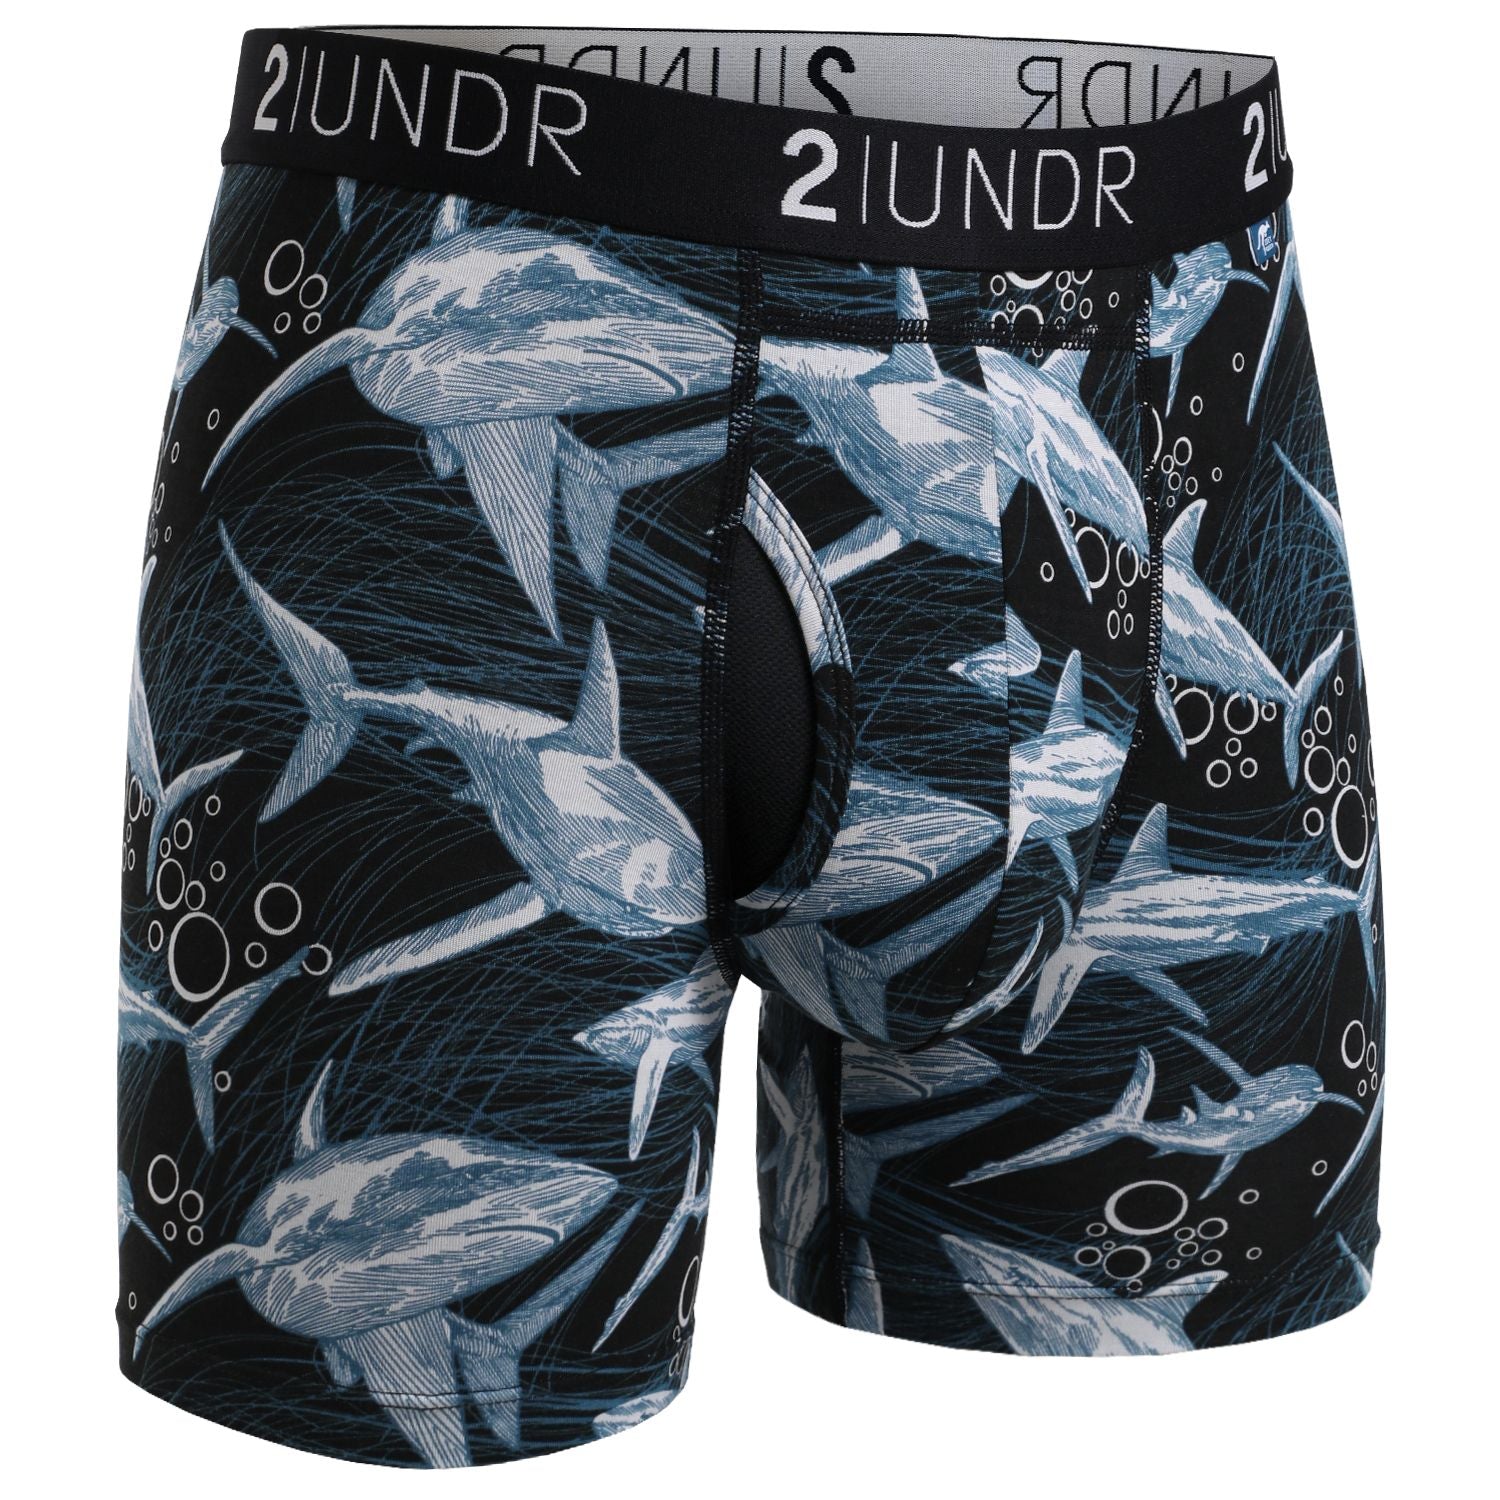 2Undr Swing Shift Boxer Brief Prints - Great White - My Filosophy